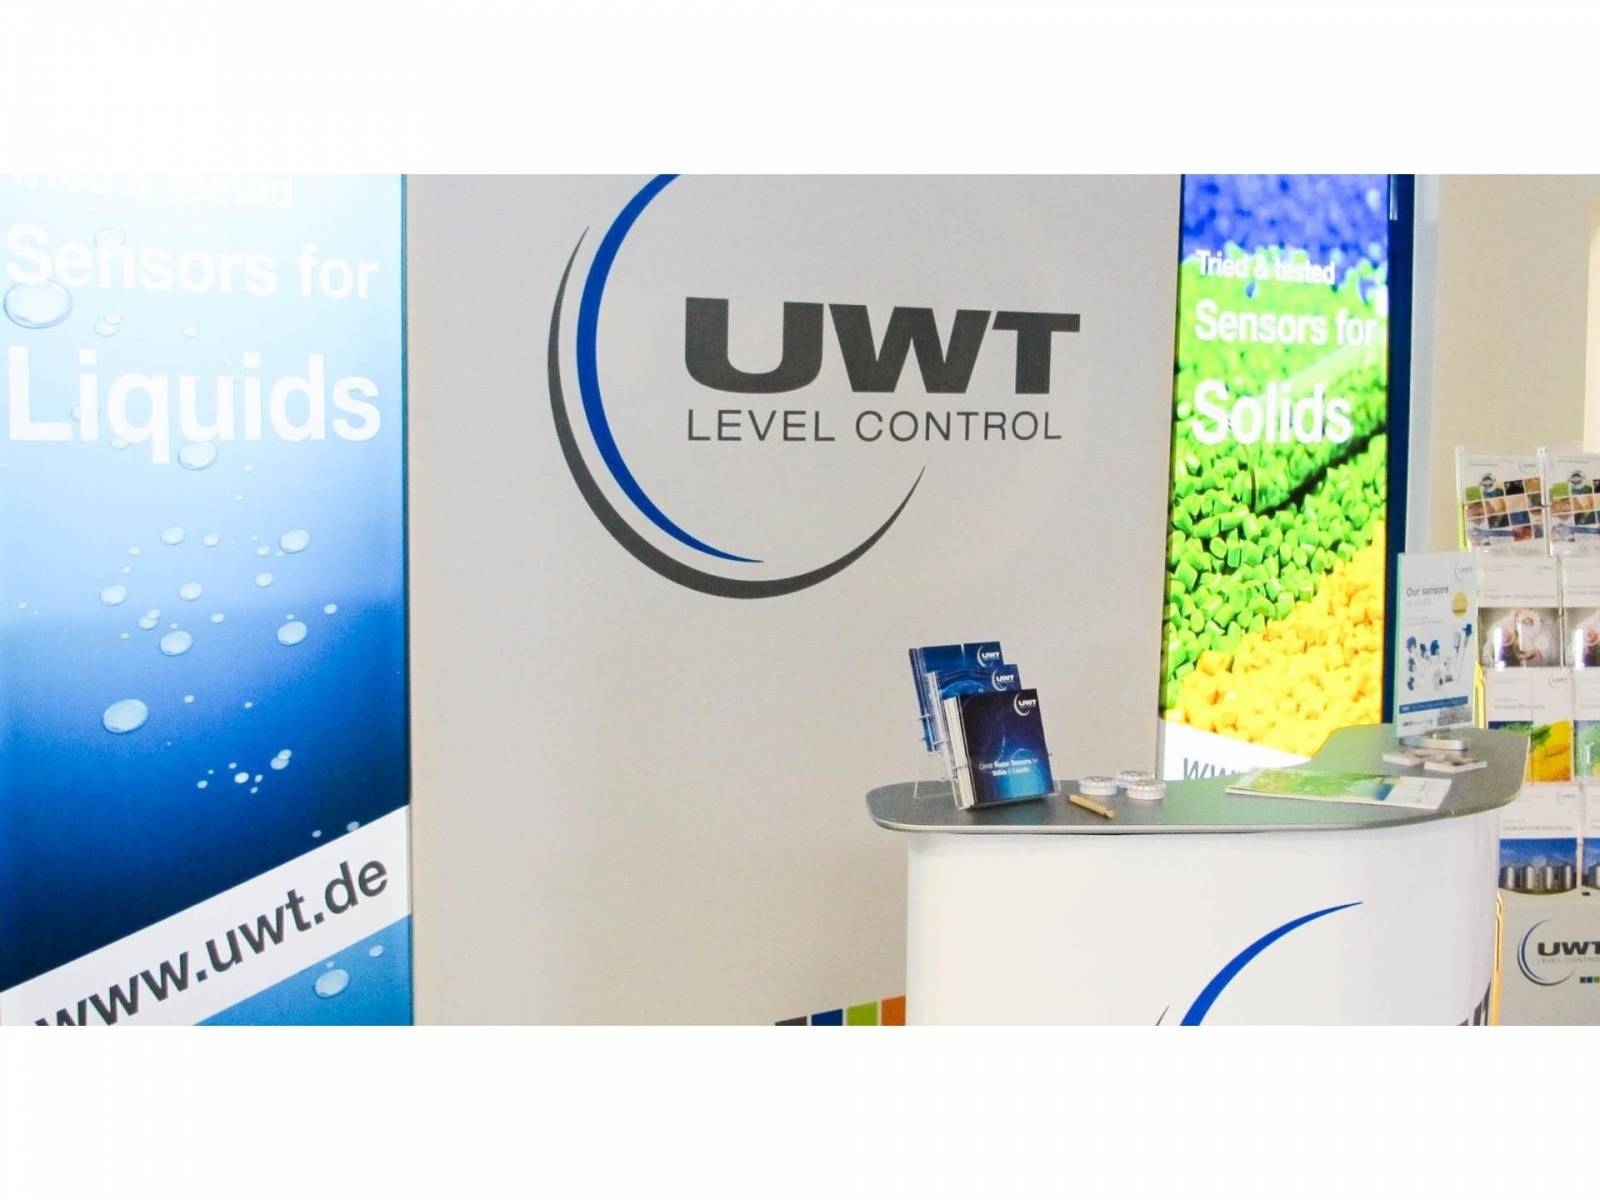 New exhibition unit from UWT